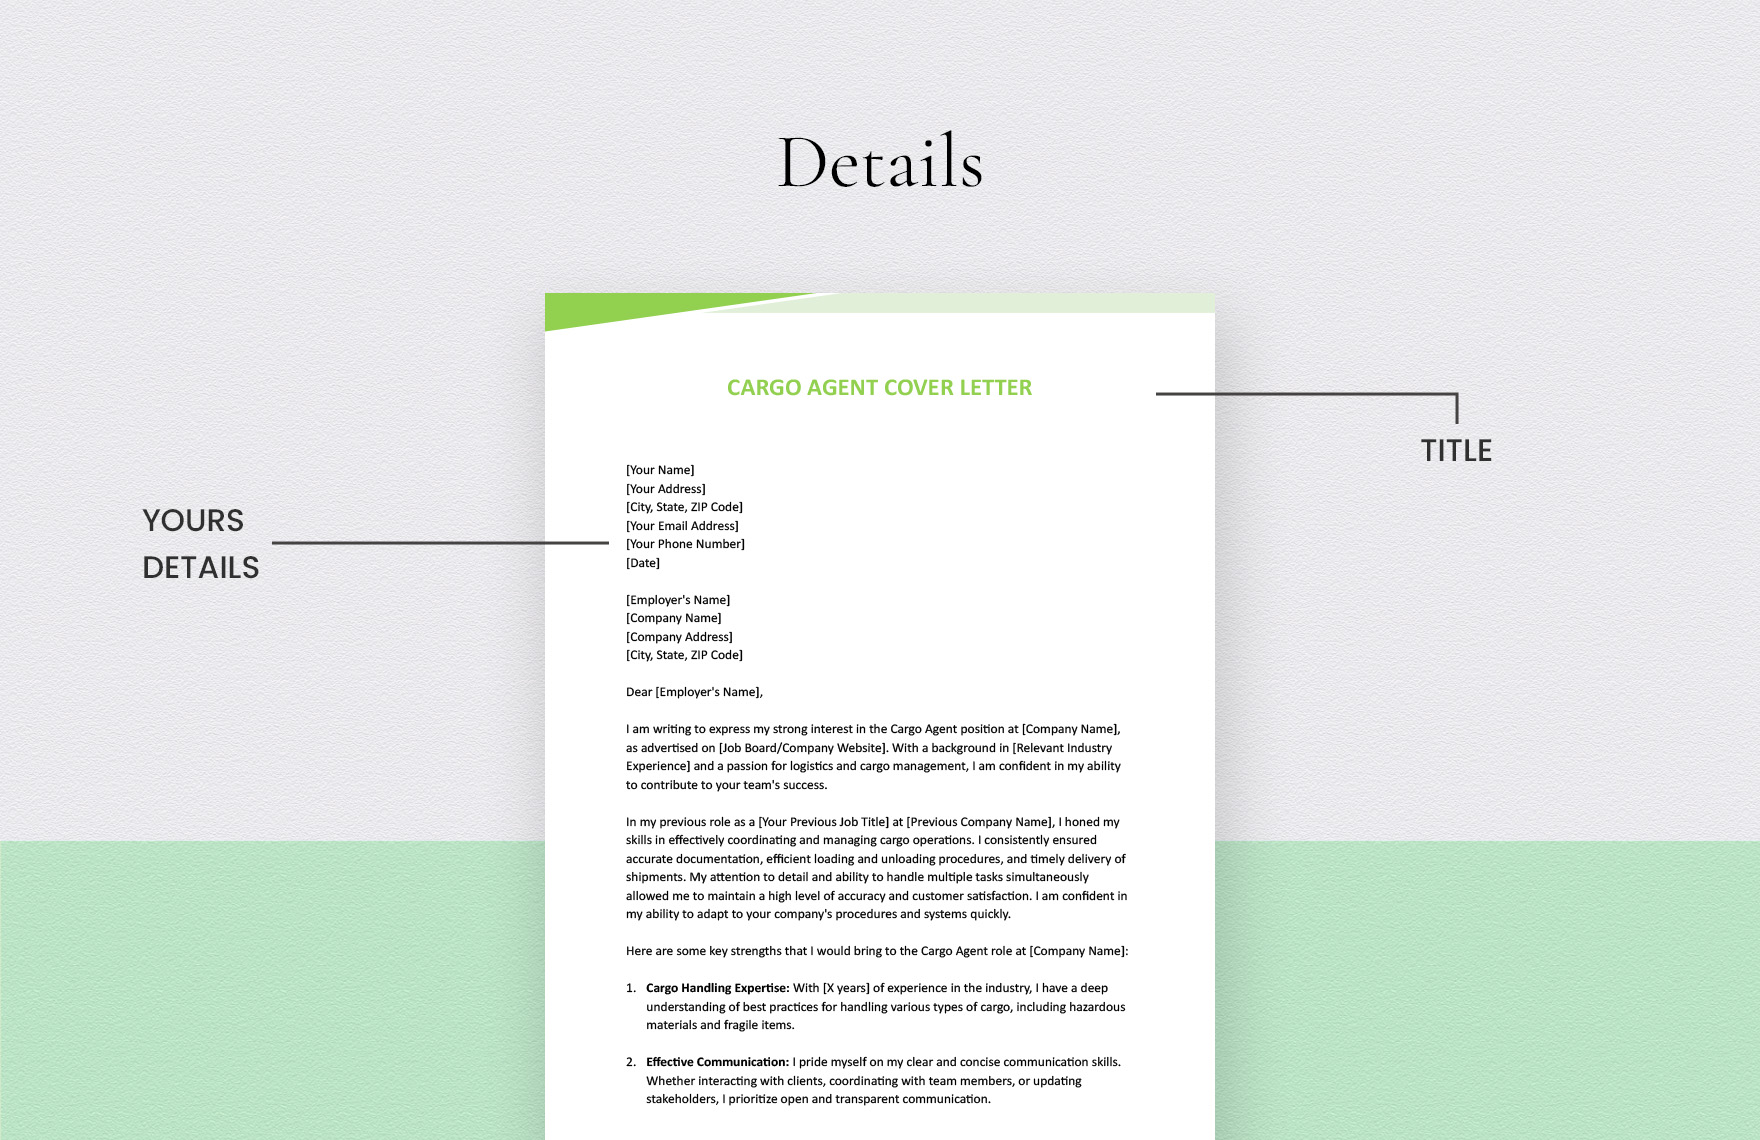 Cargo Agent Cover Letter